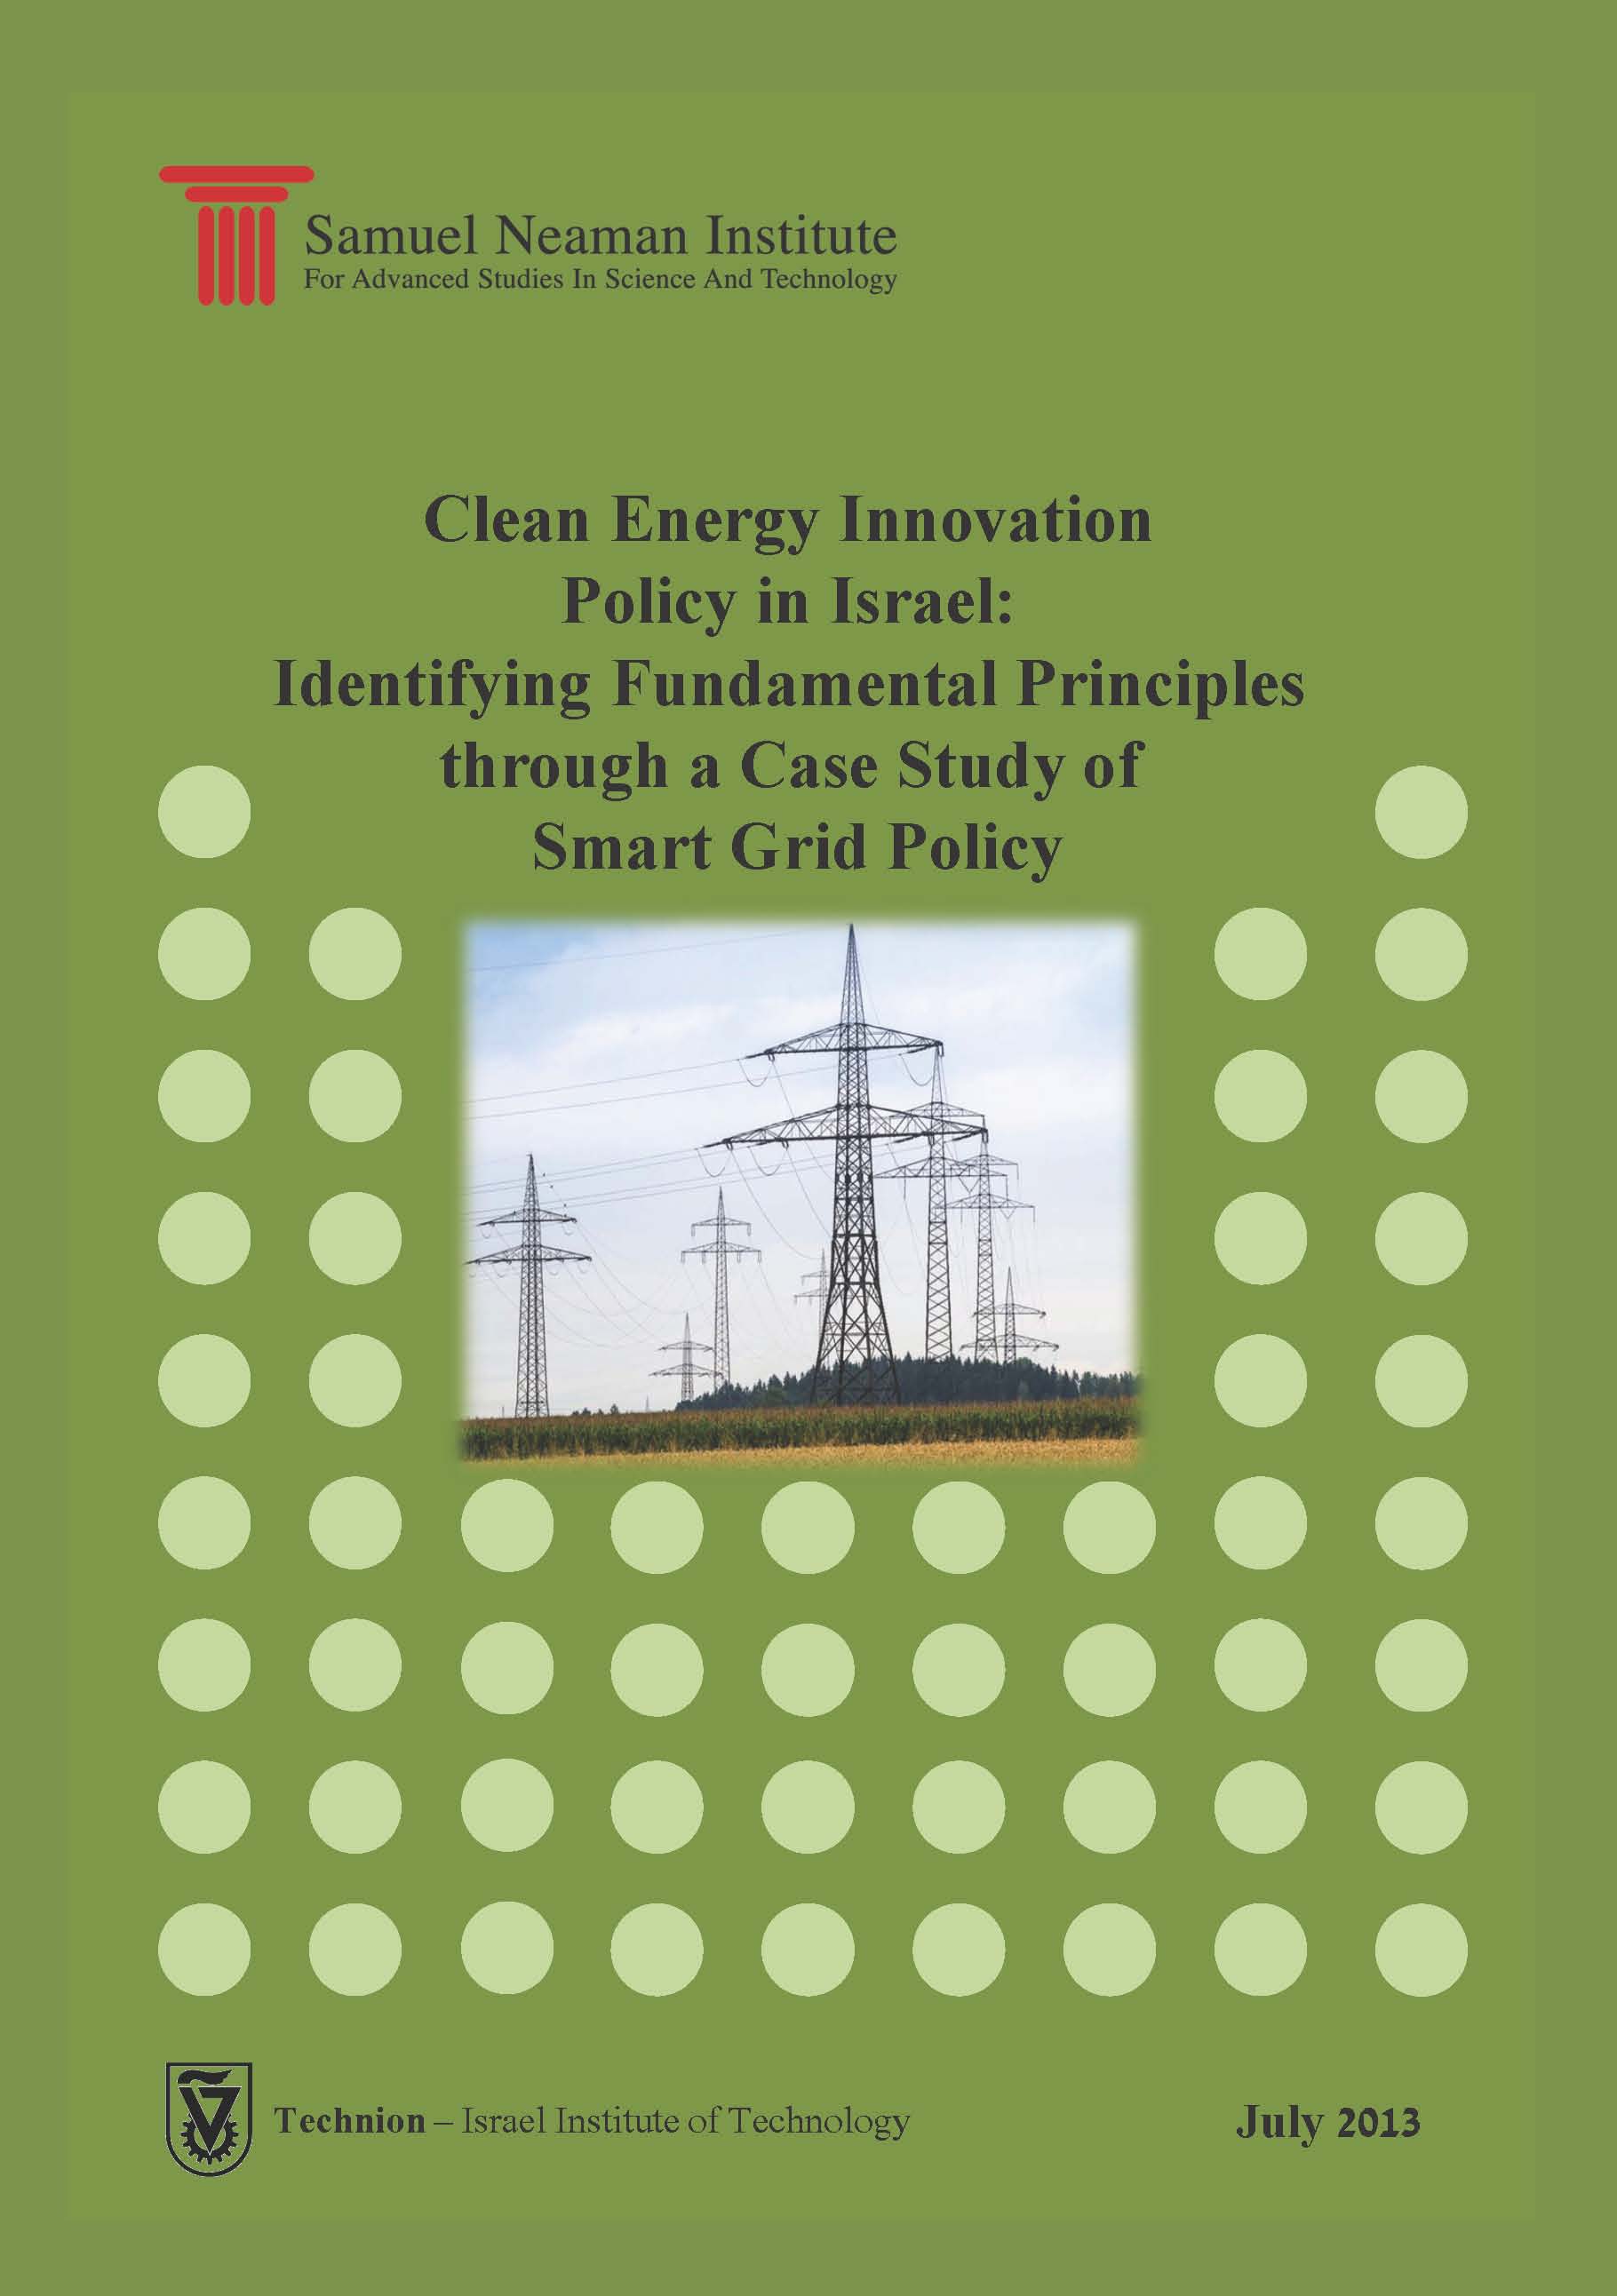 Clean Energy Innovation Policy in Israel: Identifying Fundamental Principles through a Case Study of Smart Grid Policy